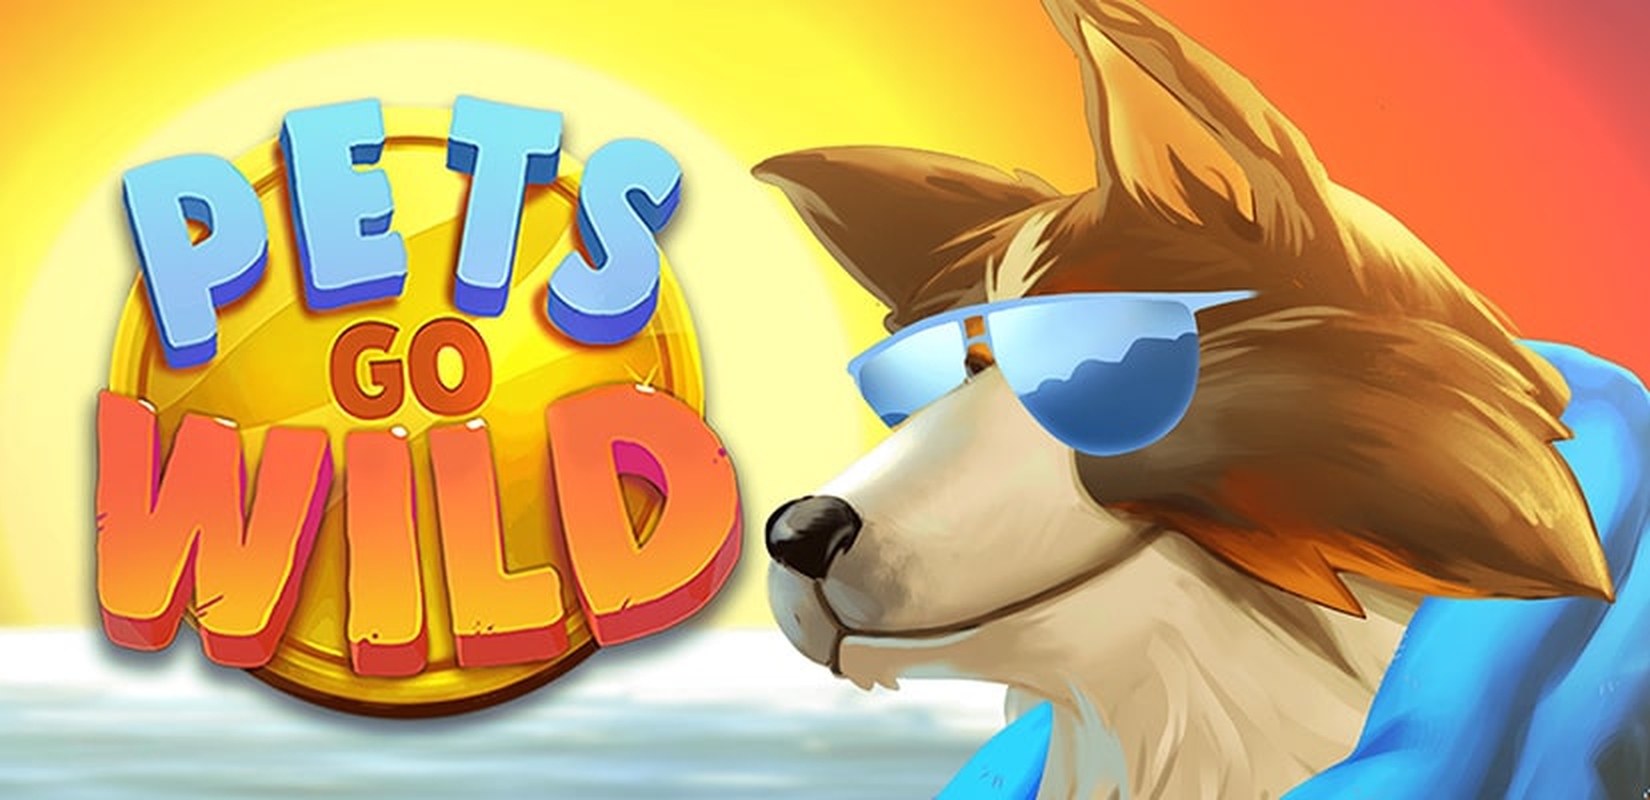 The Pets Go Wild Online Slot Demo Game by Skillzzgaming